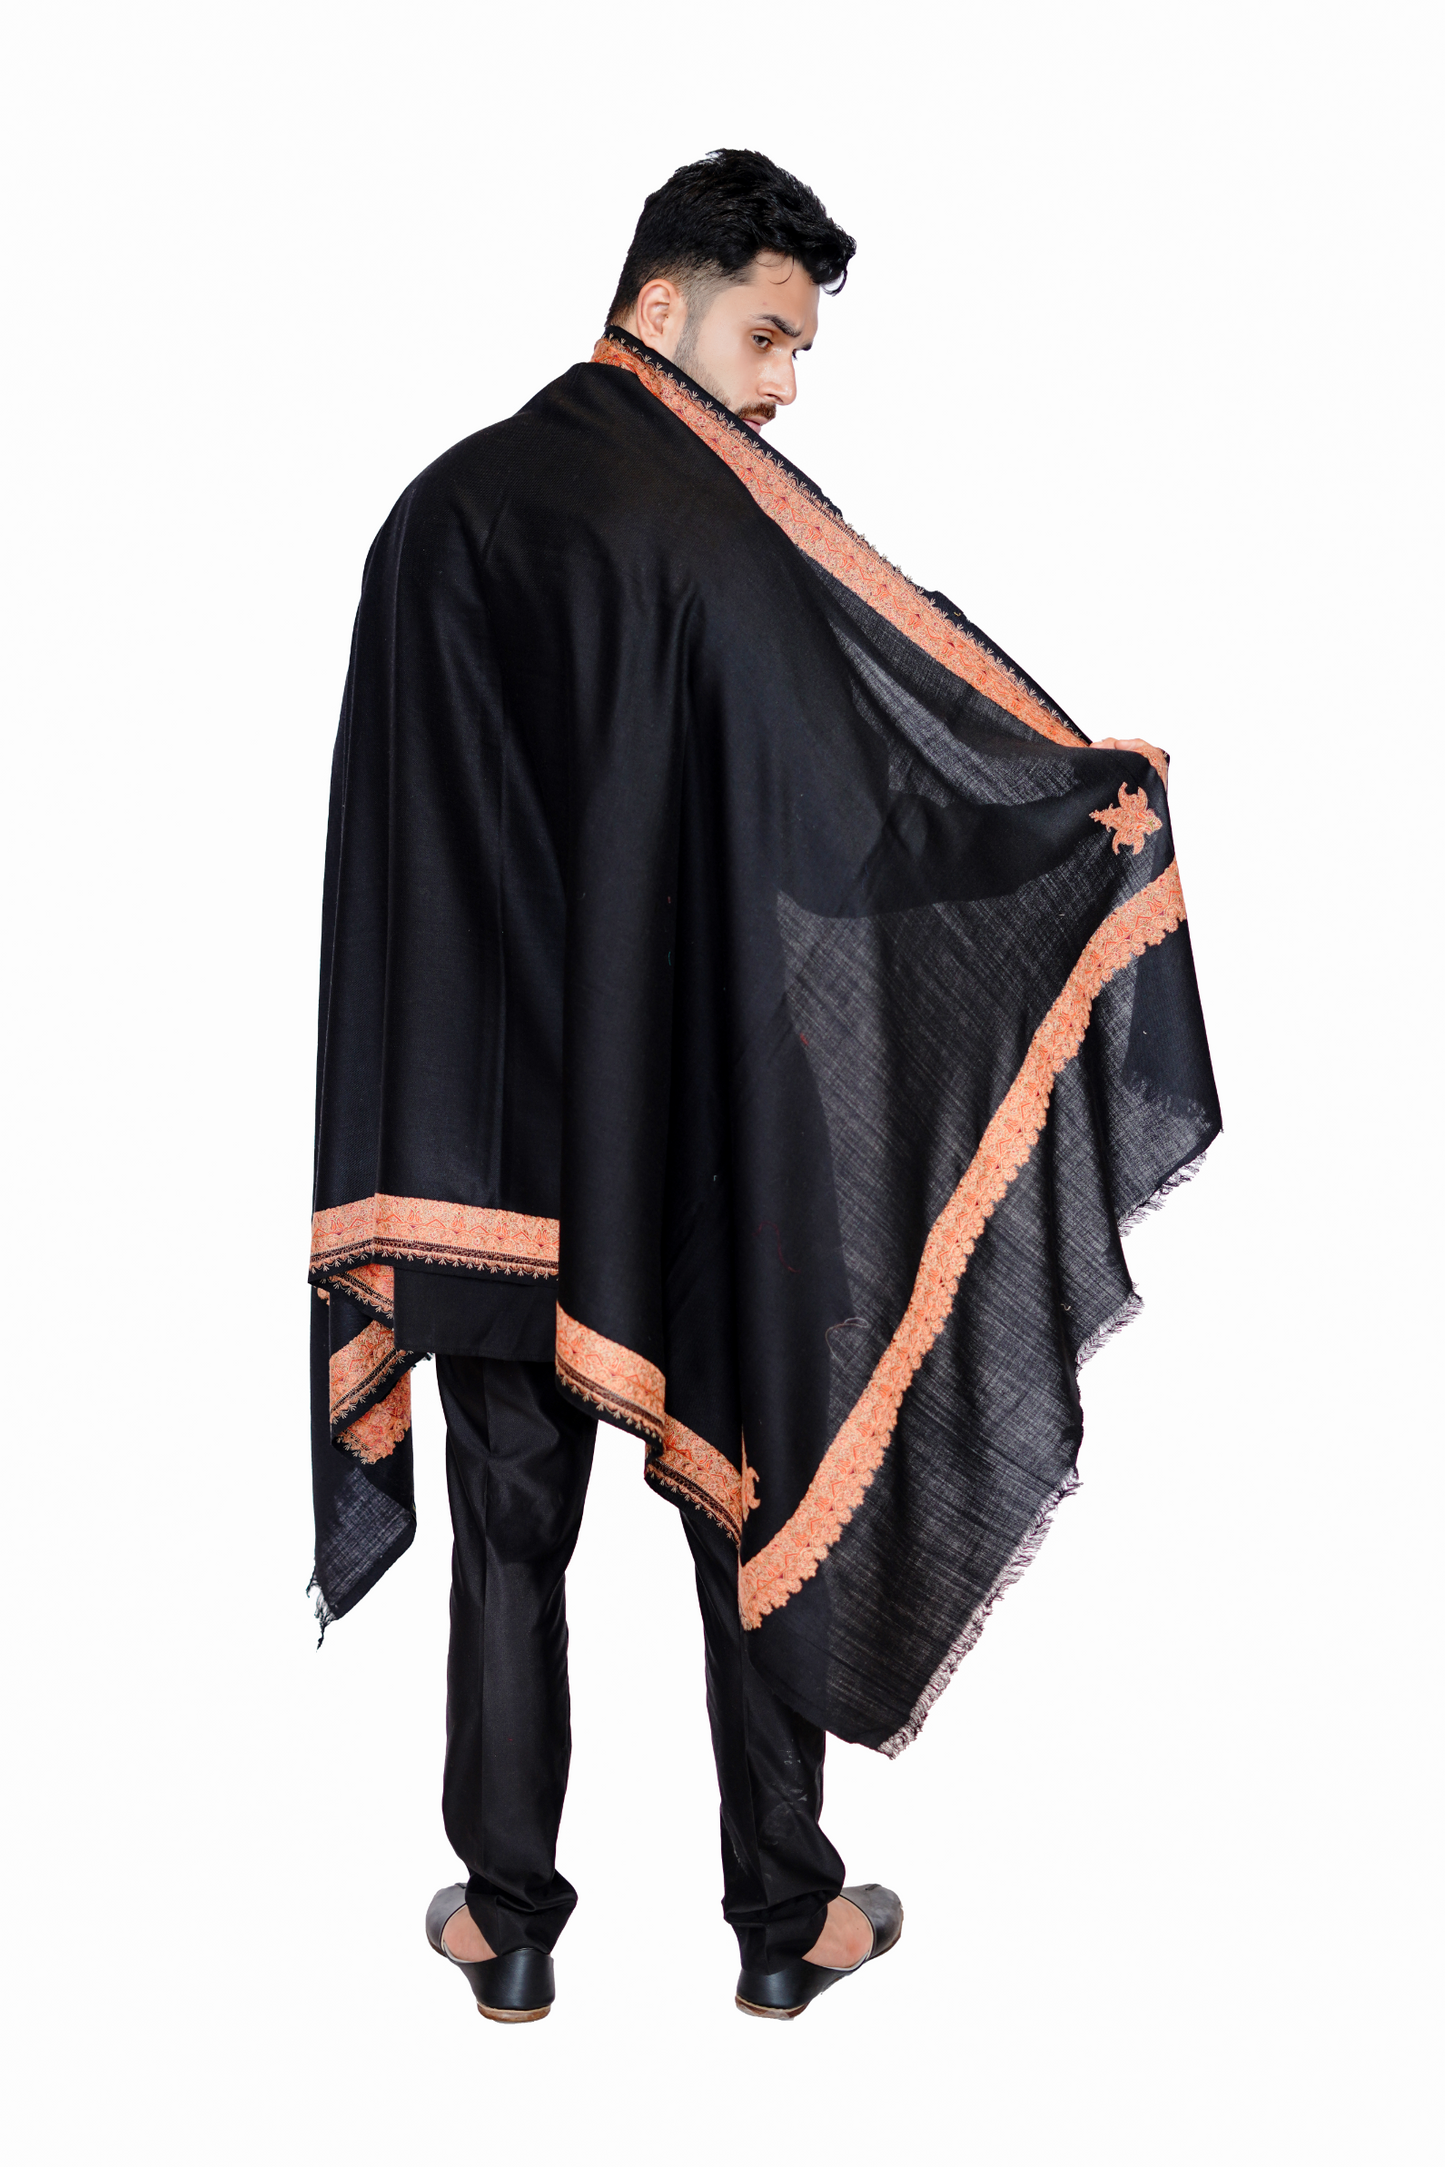 Hand-Embroidered Wool Blend Shawl for Men – Chick Charcoal/Classic Black